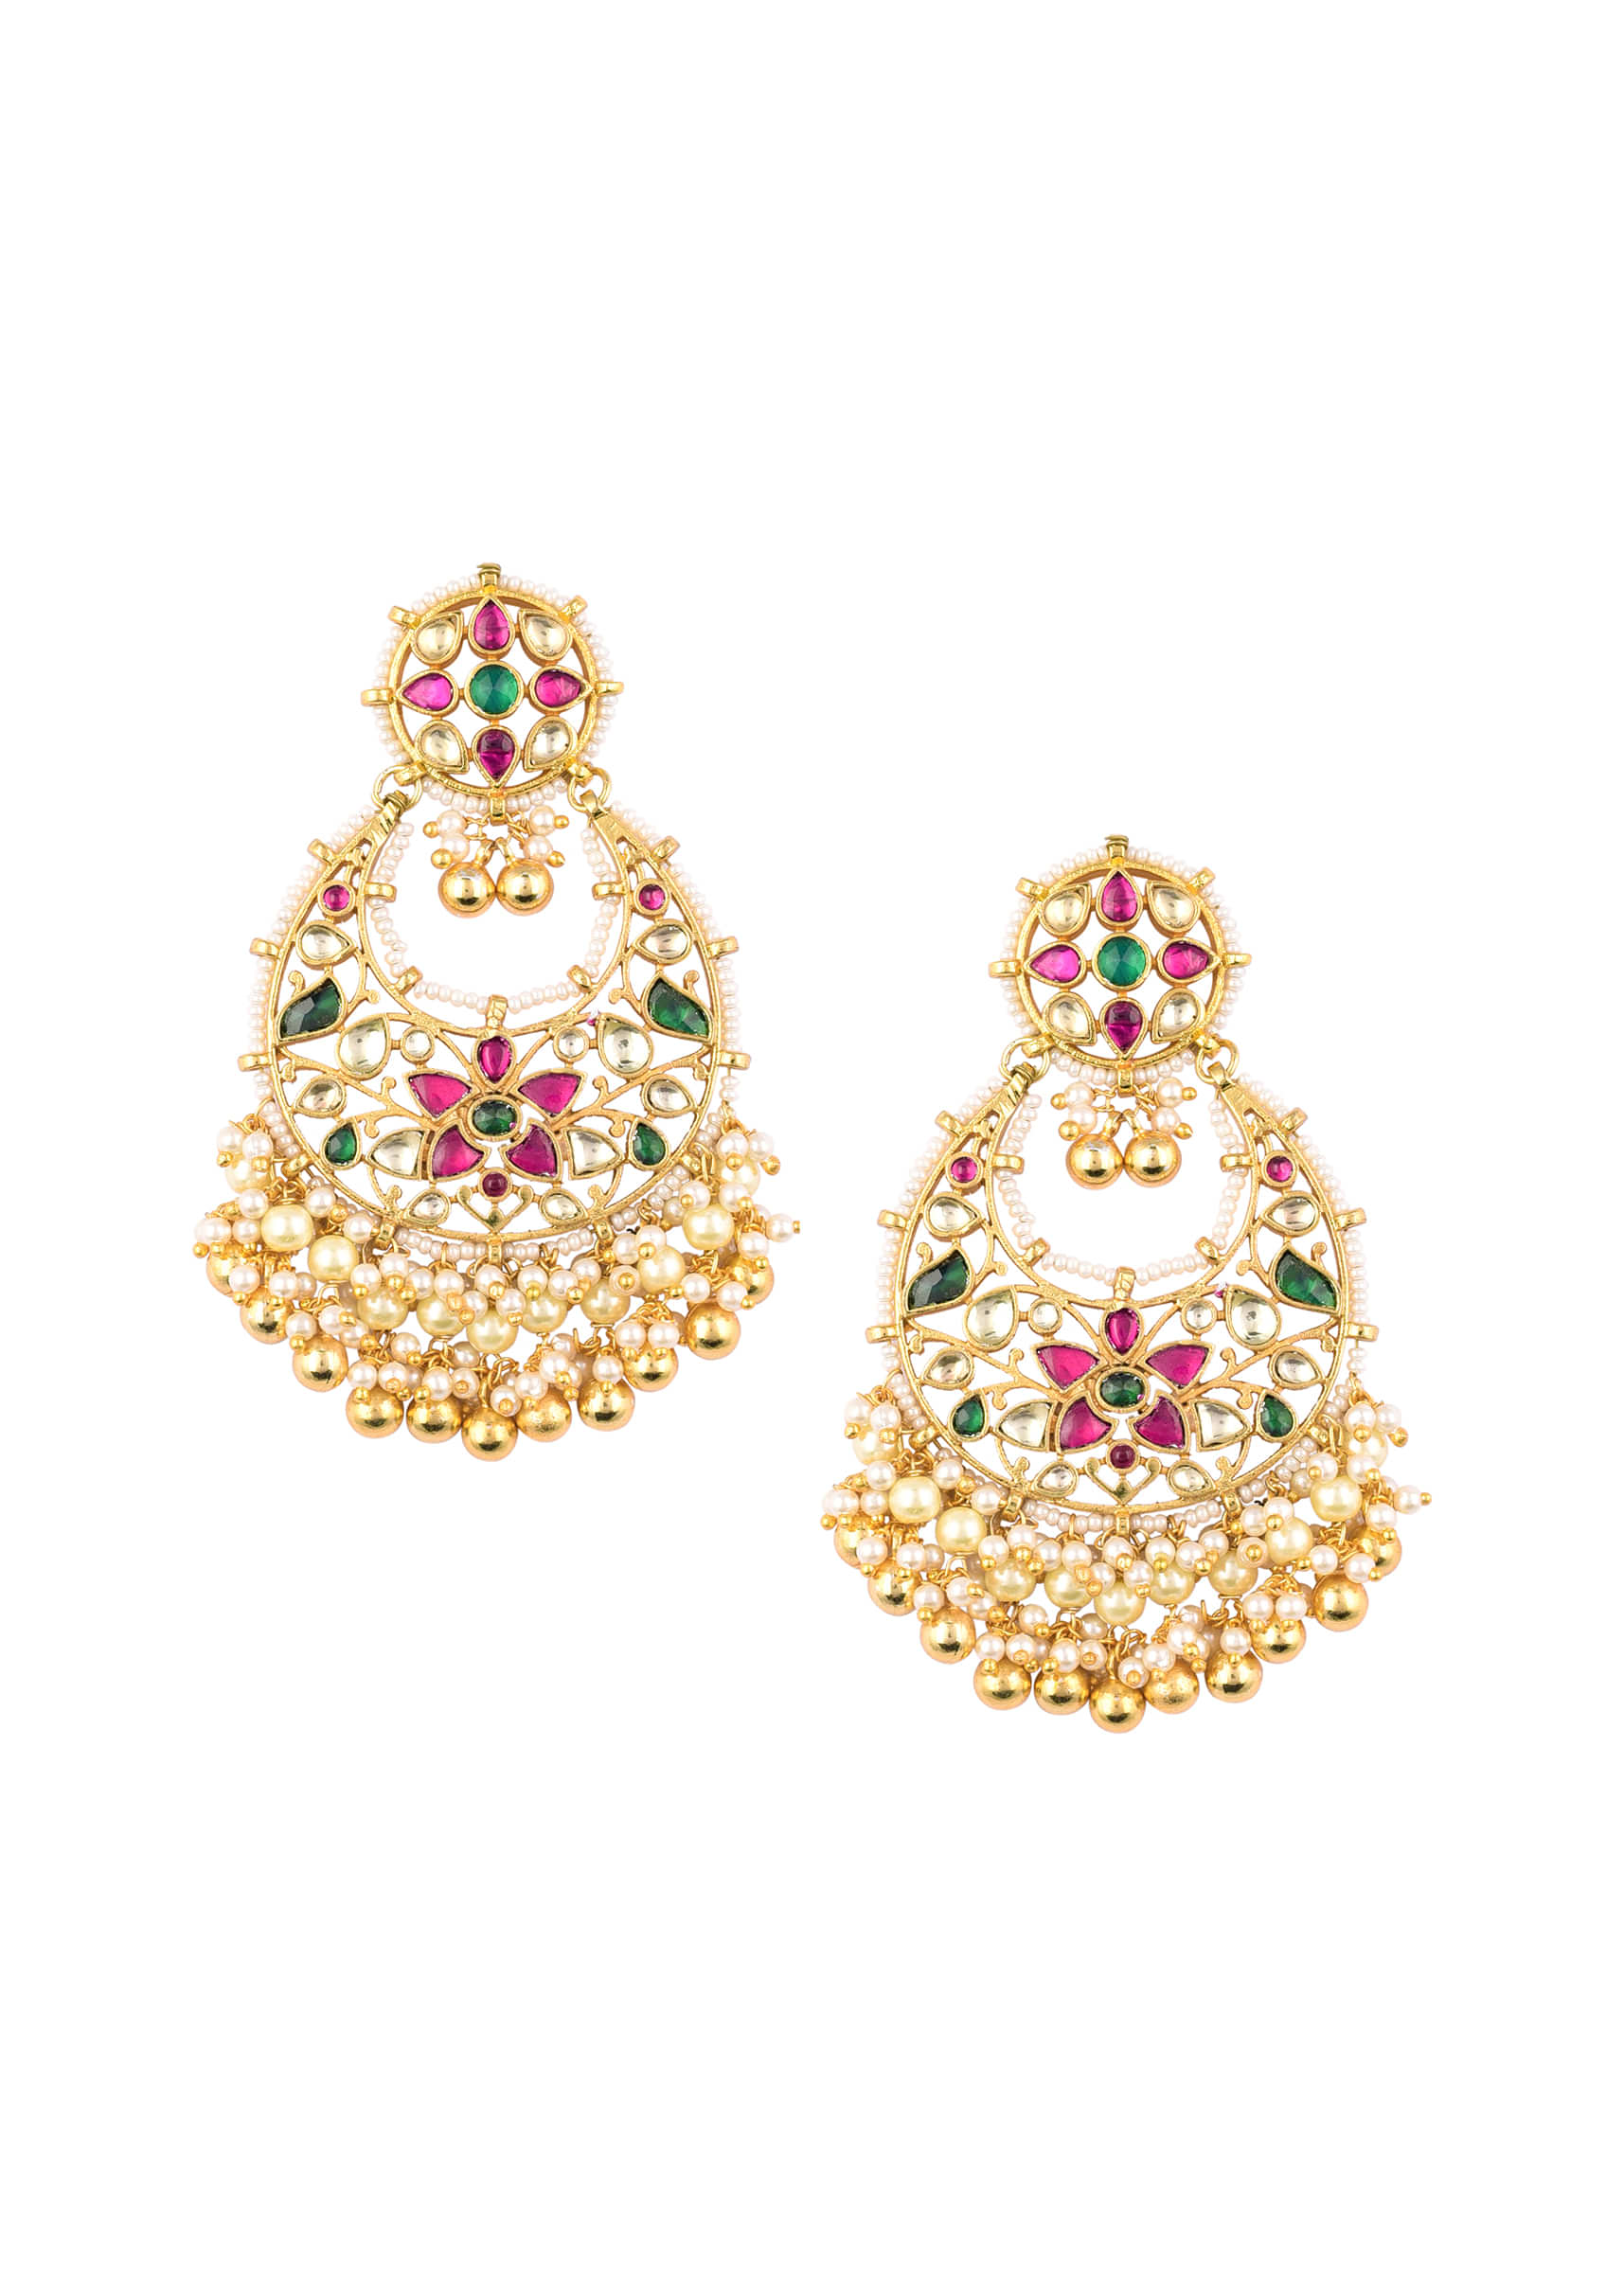 Gold Finish Kundan Chandabalis With Beads And Green-Red Stones